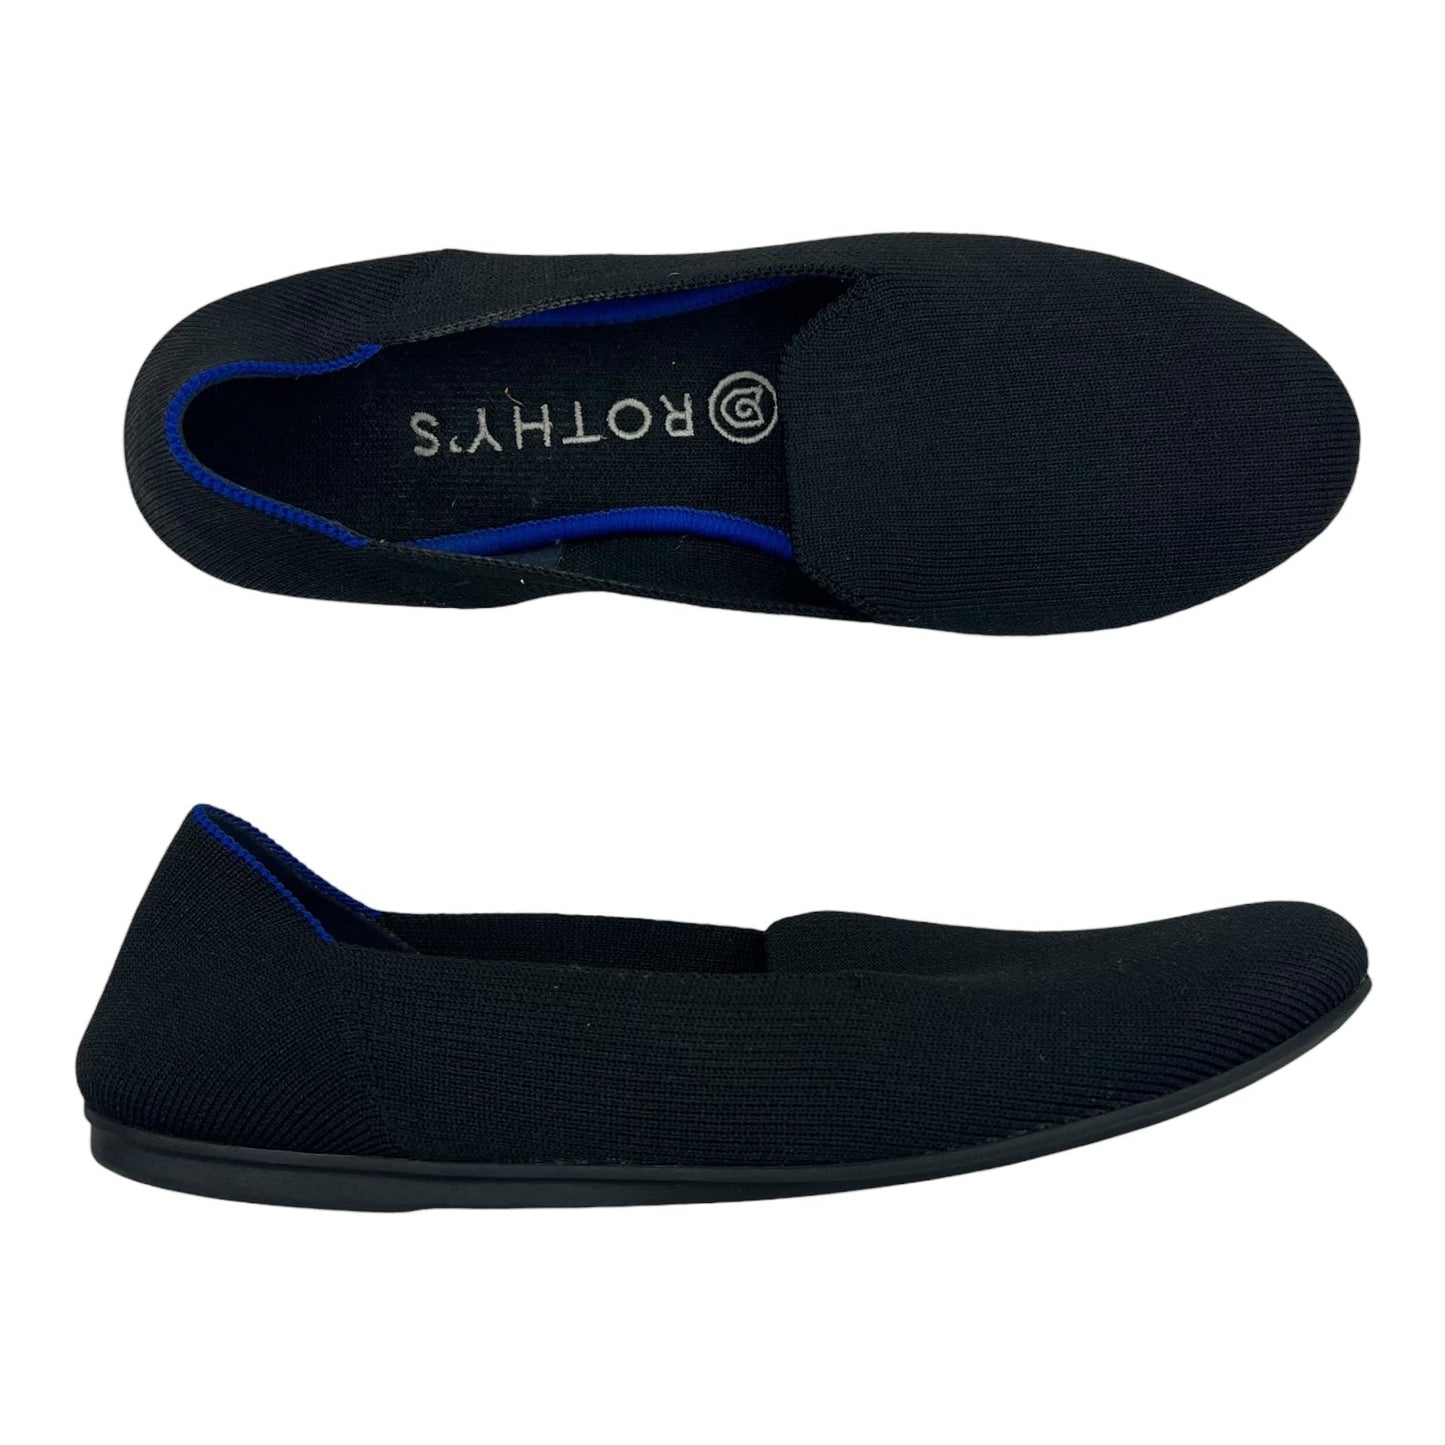 BLACK SHOES FLATS by ROTHYS Size:8